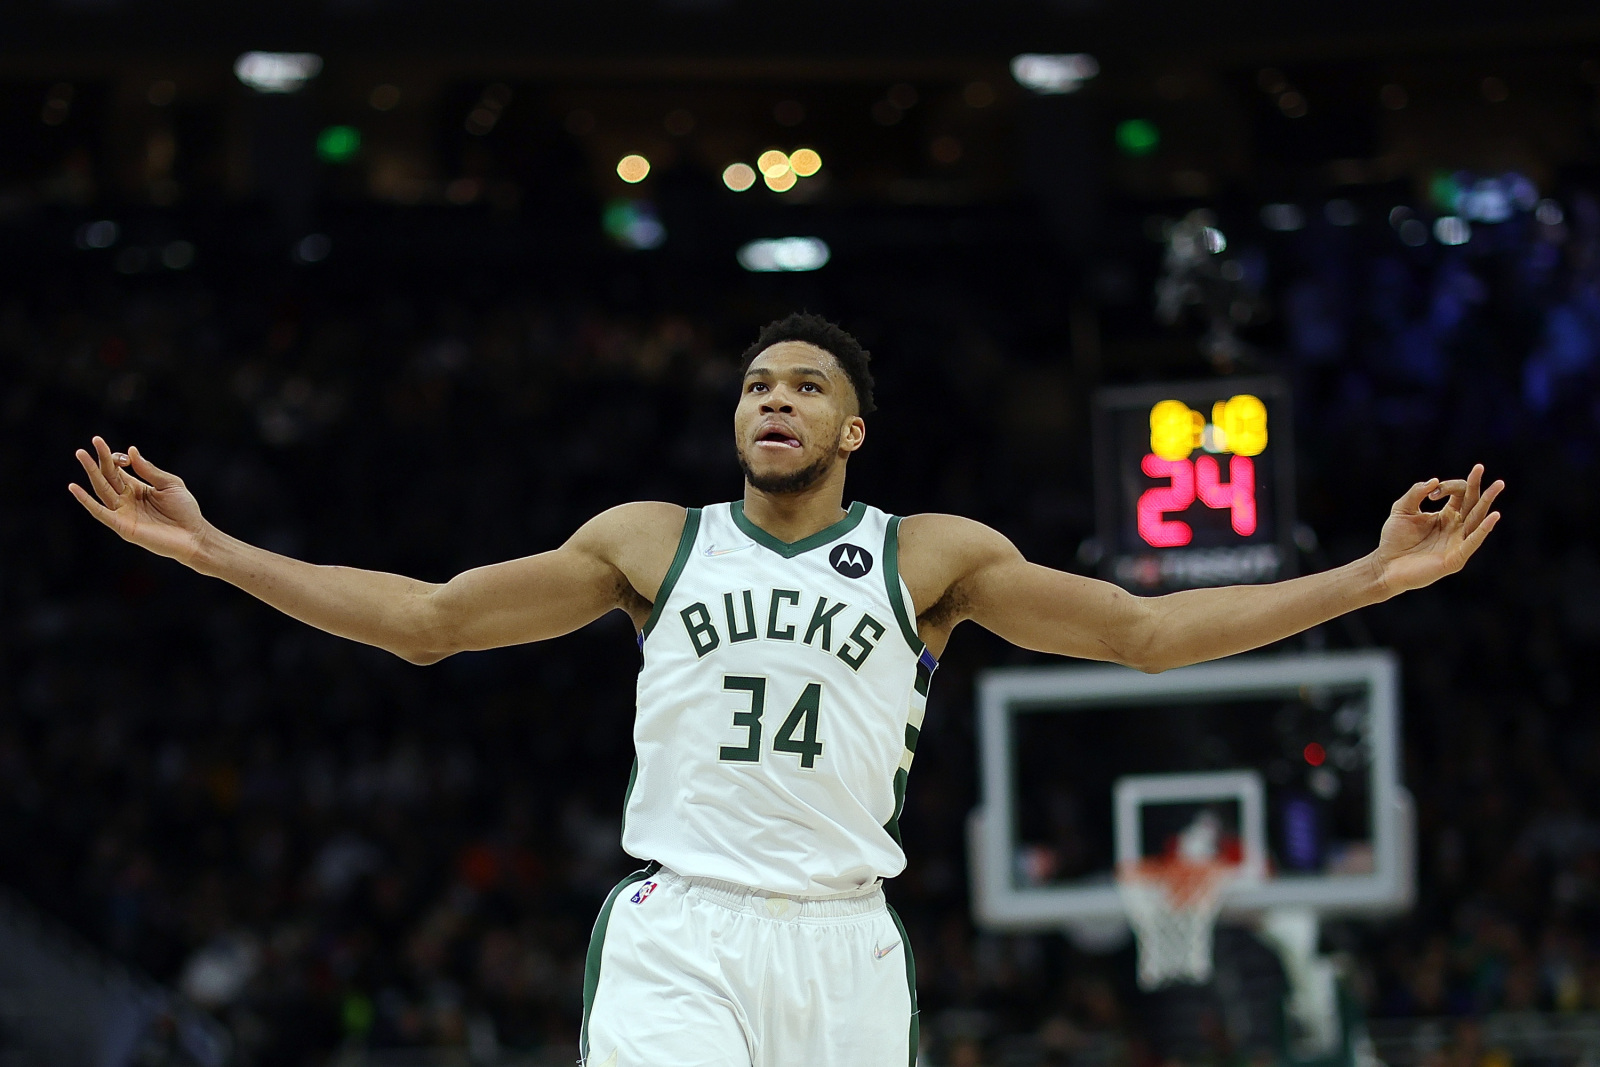 Giannis Antetokounmpo, NBA Champion, was unstoppable in the Finals.